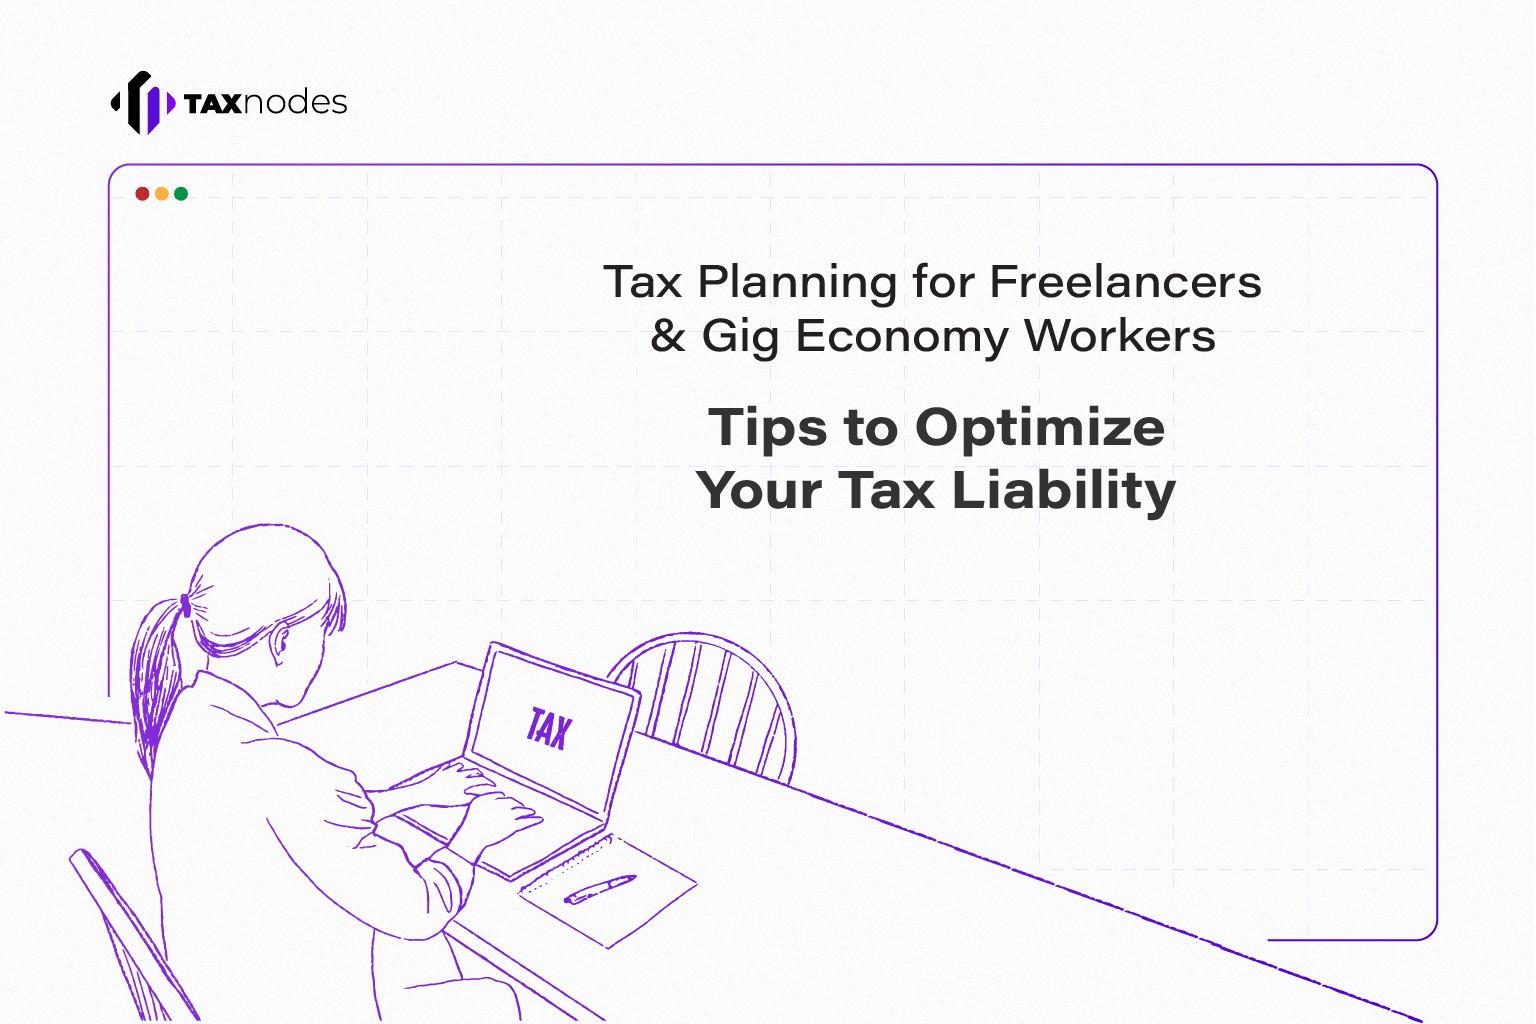 Freelancers and Gig Economy Workers - Tax Planning Tips